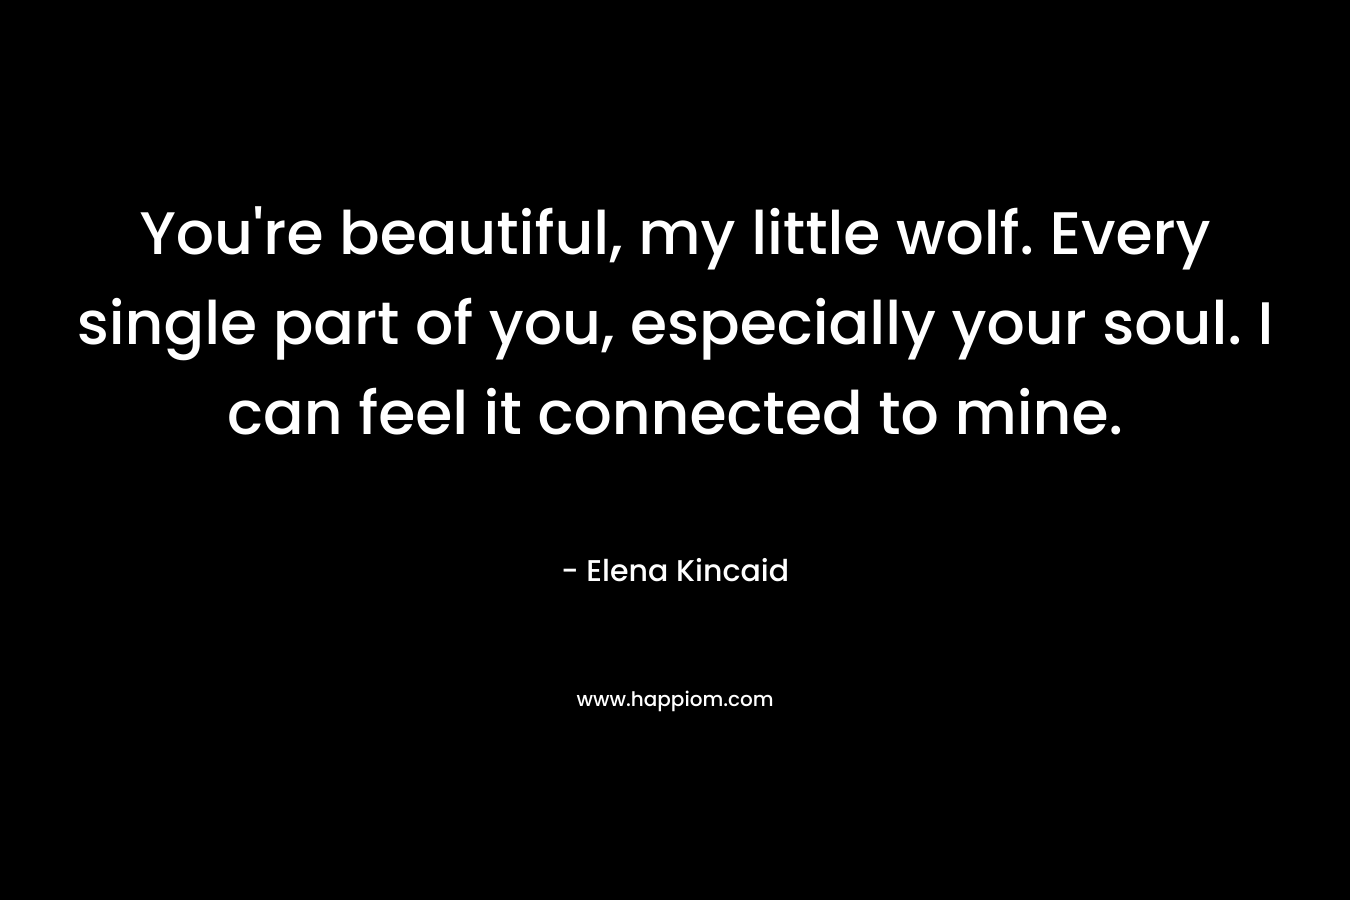 You’re beautiful, my little wolf. Every single part of you, especially your soul. I can feel it connected to mine. – Elena Kincaid